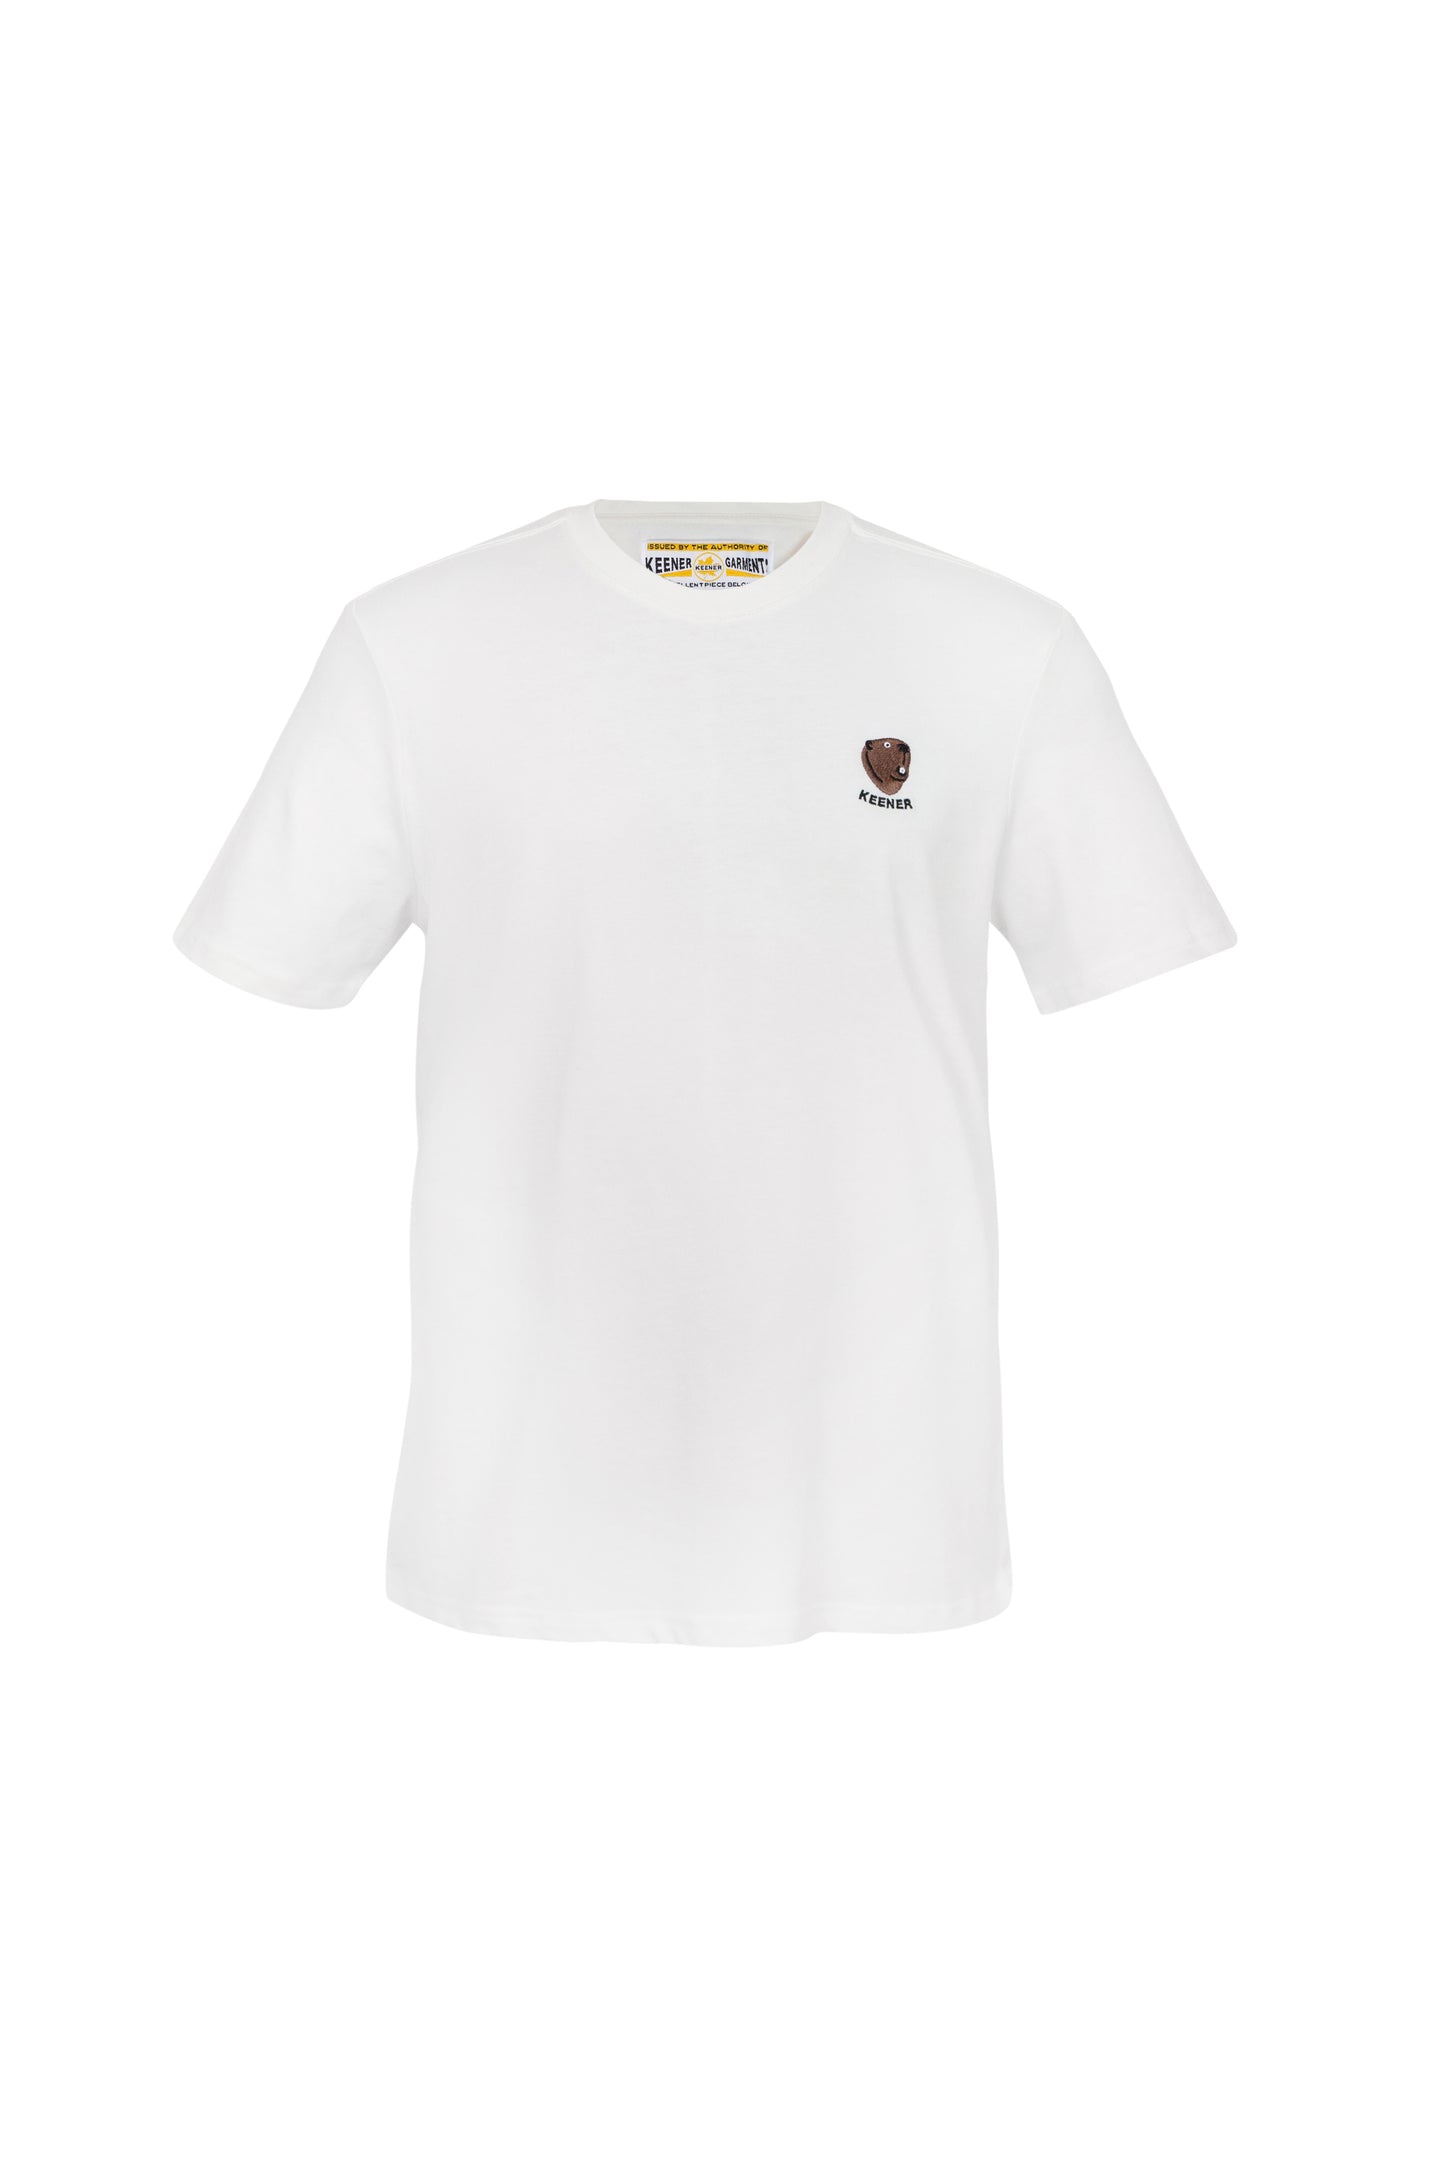 Beaver t - classic white - front